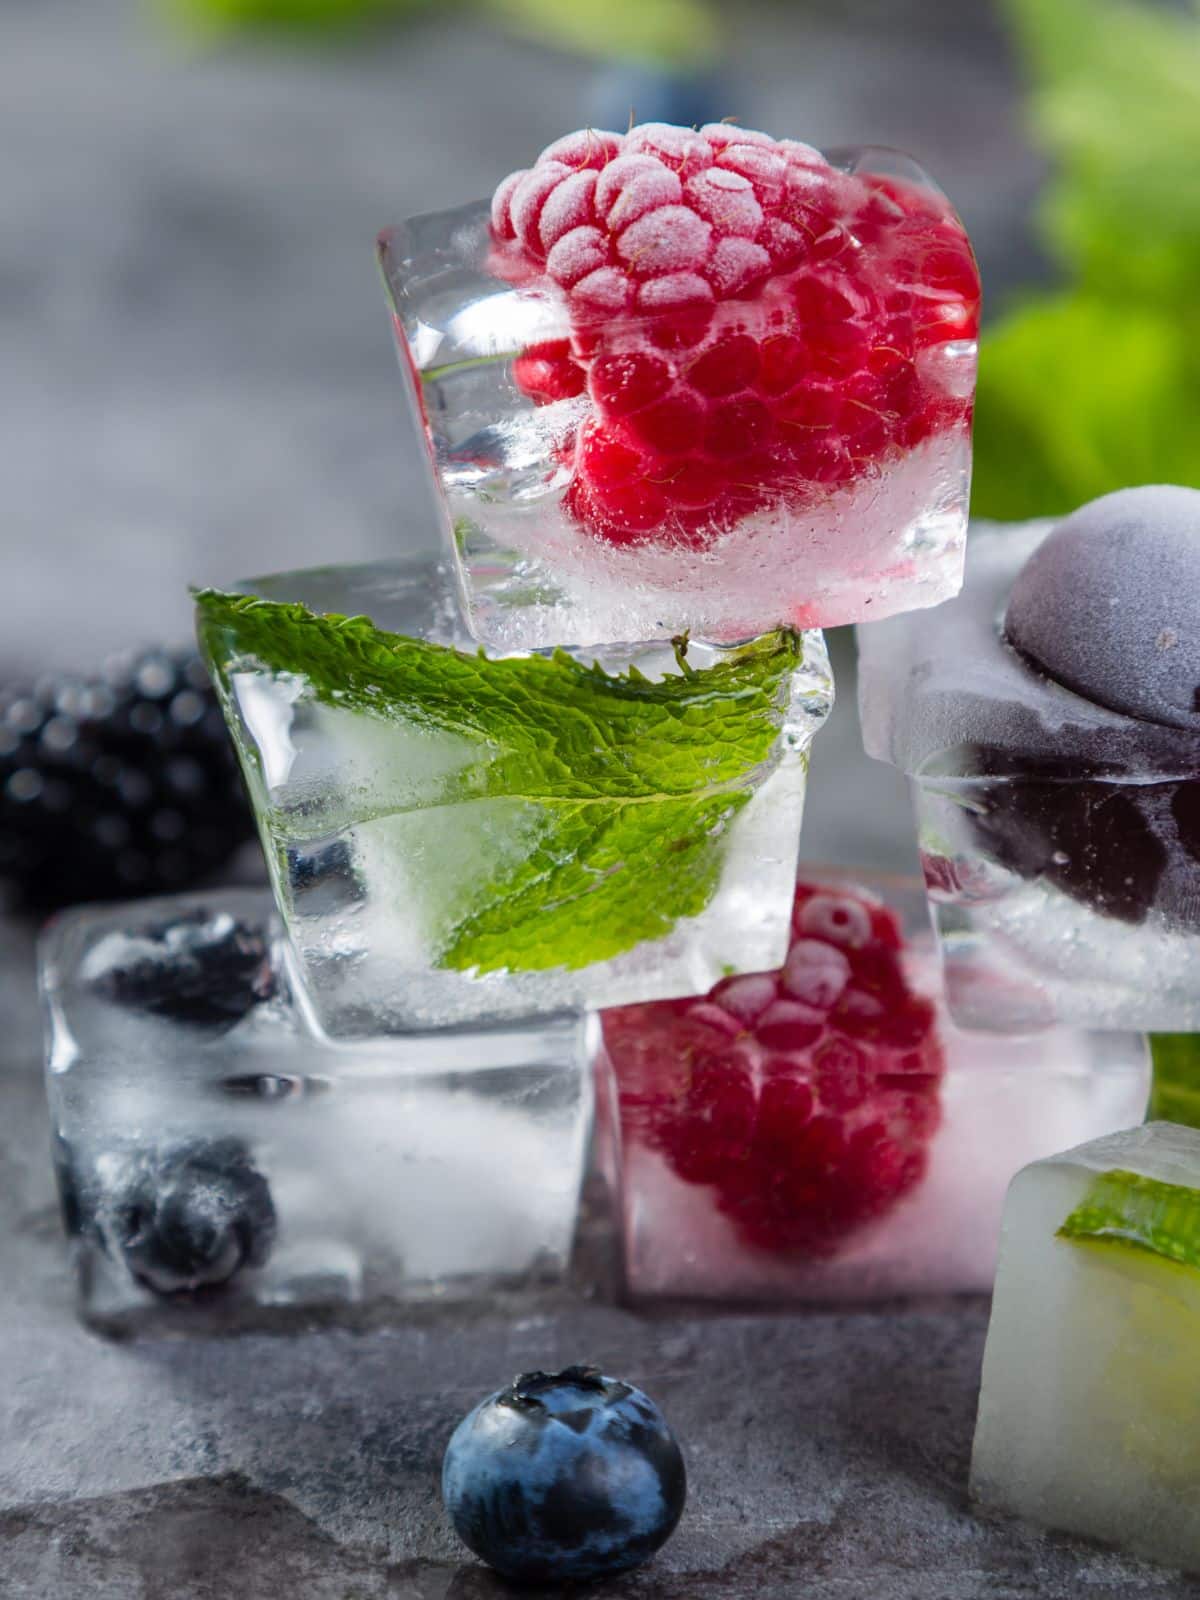 frozen blueberries, raspberries and mint in ice cubes.